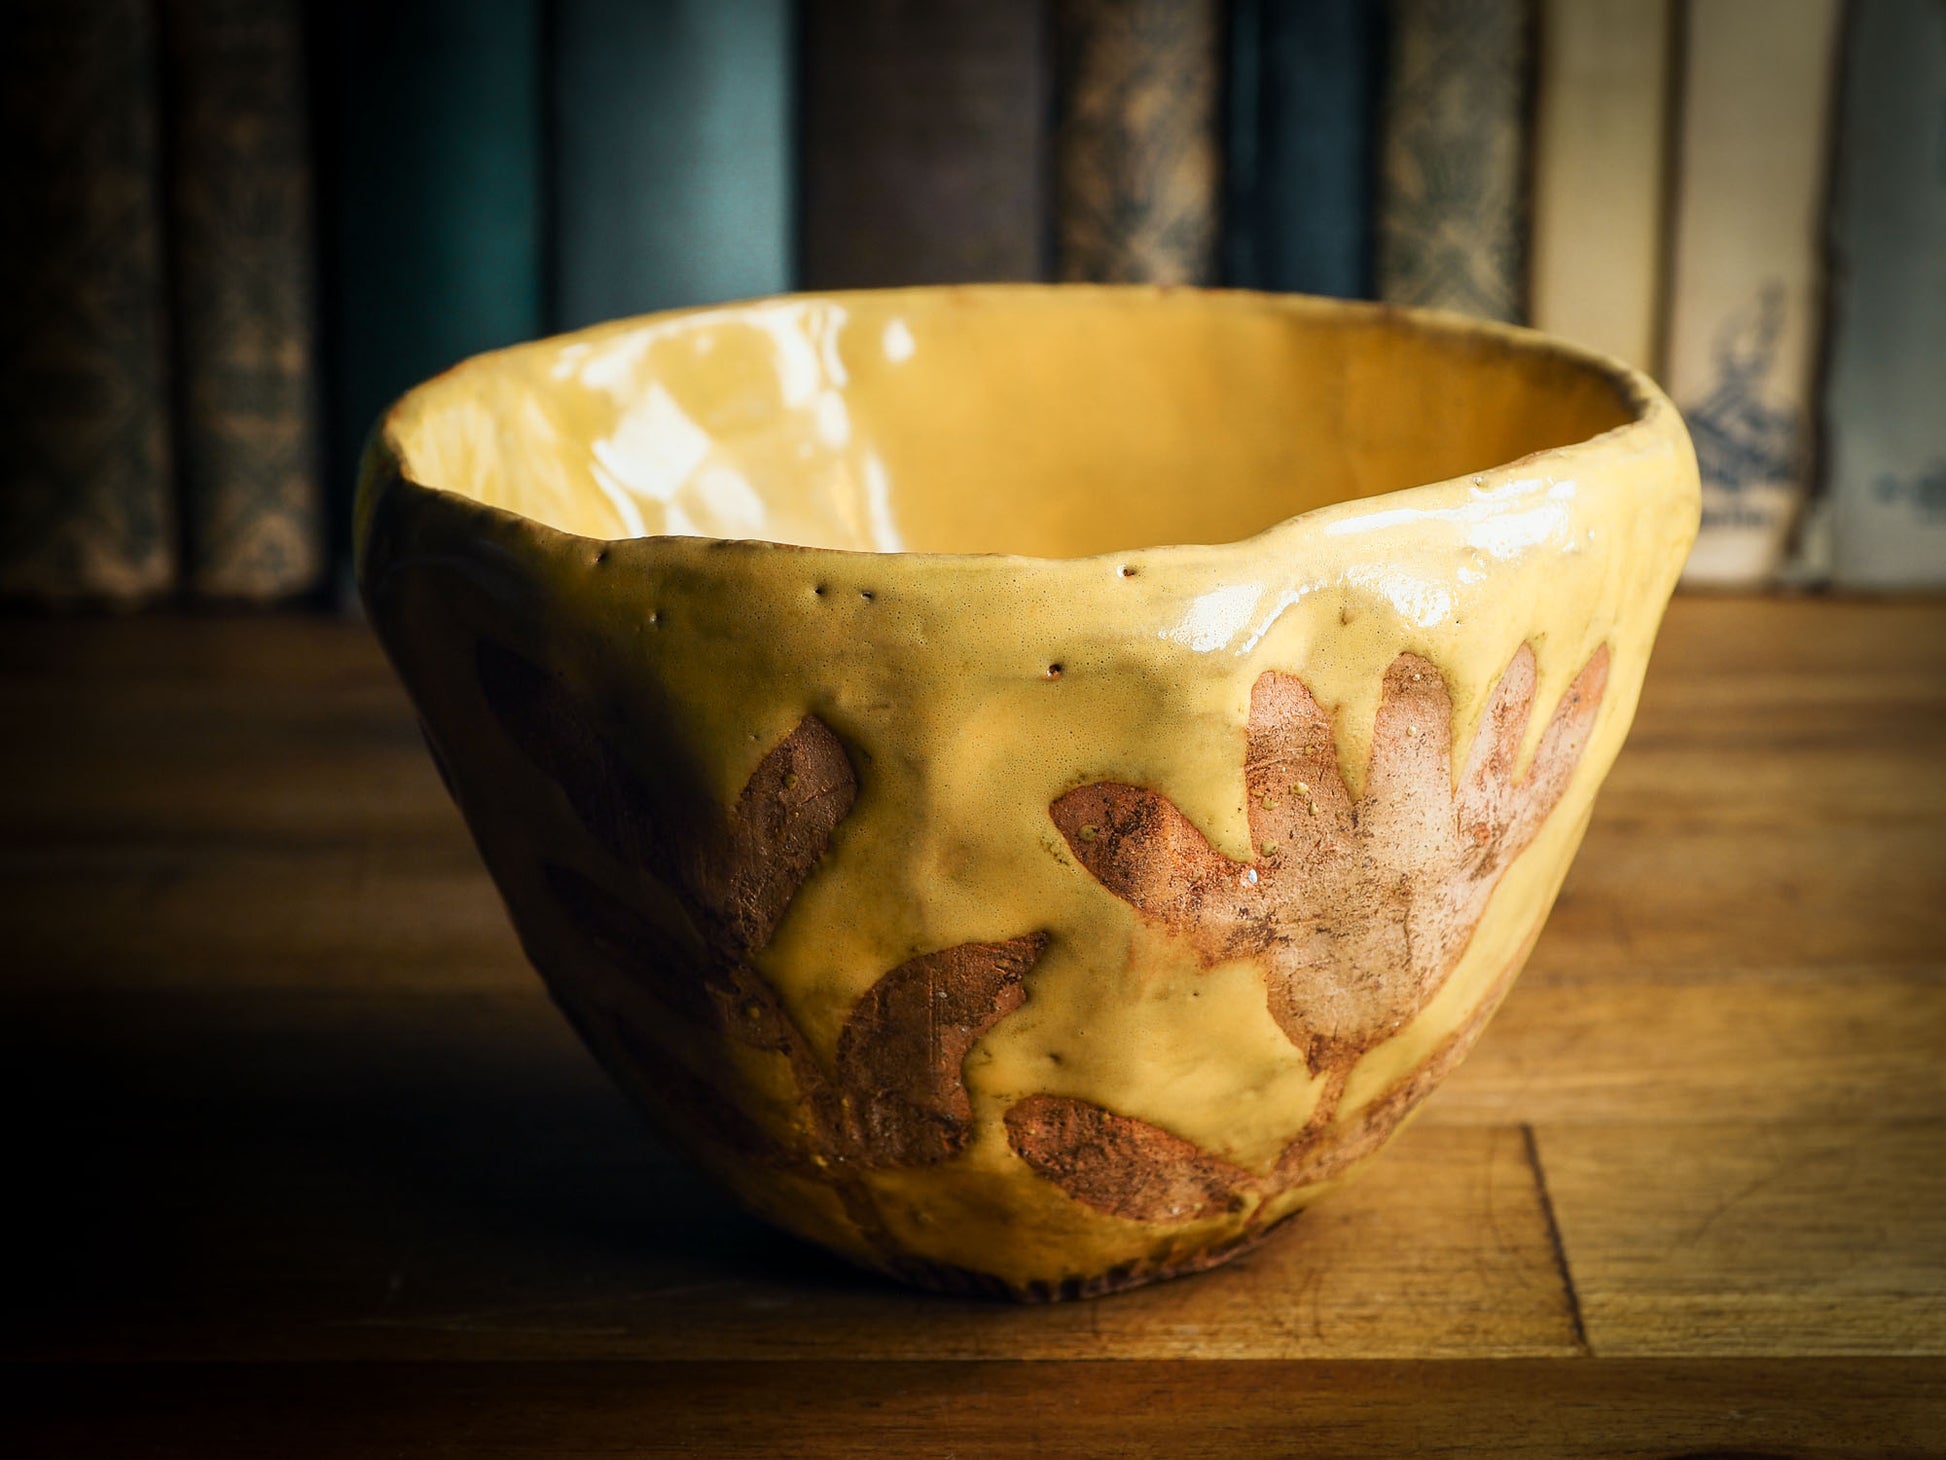 Original fired earthenware ceramic hand pinched bowl with yellow and brown flowers glazed and hand painted motif by Idania Salcido, the artist behind danita Art.